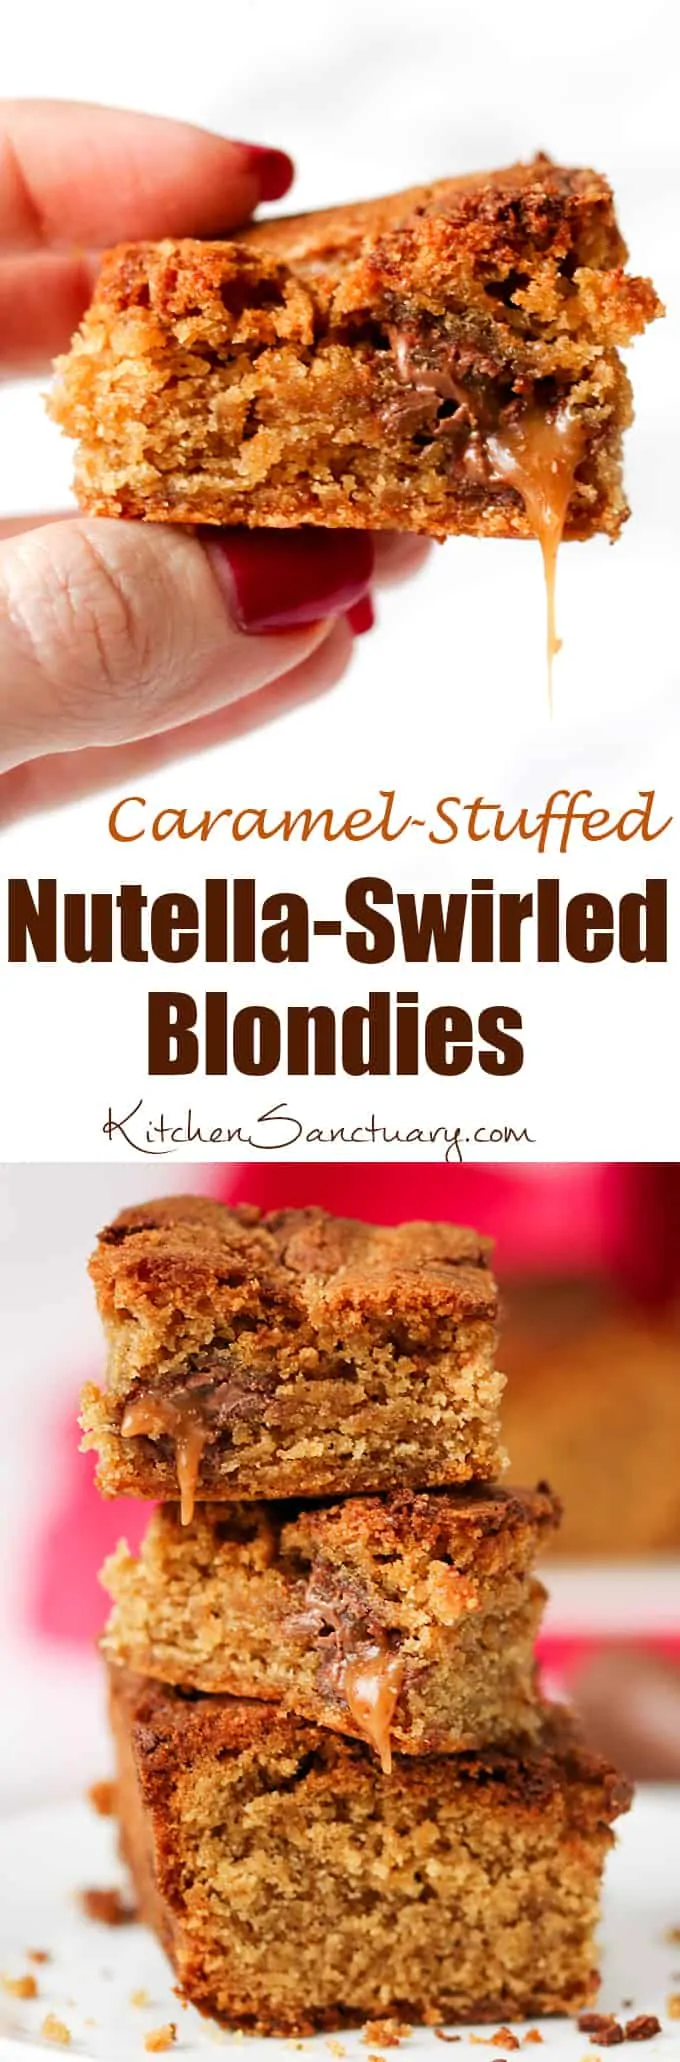 Completely indulgent, these chocolate caramel blondies with swirls of Nutella hit the spot like nothing else!